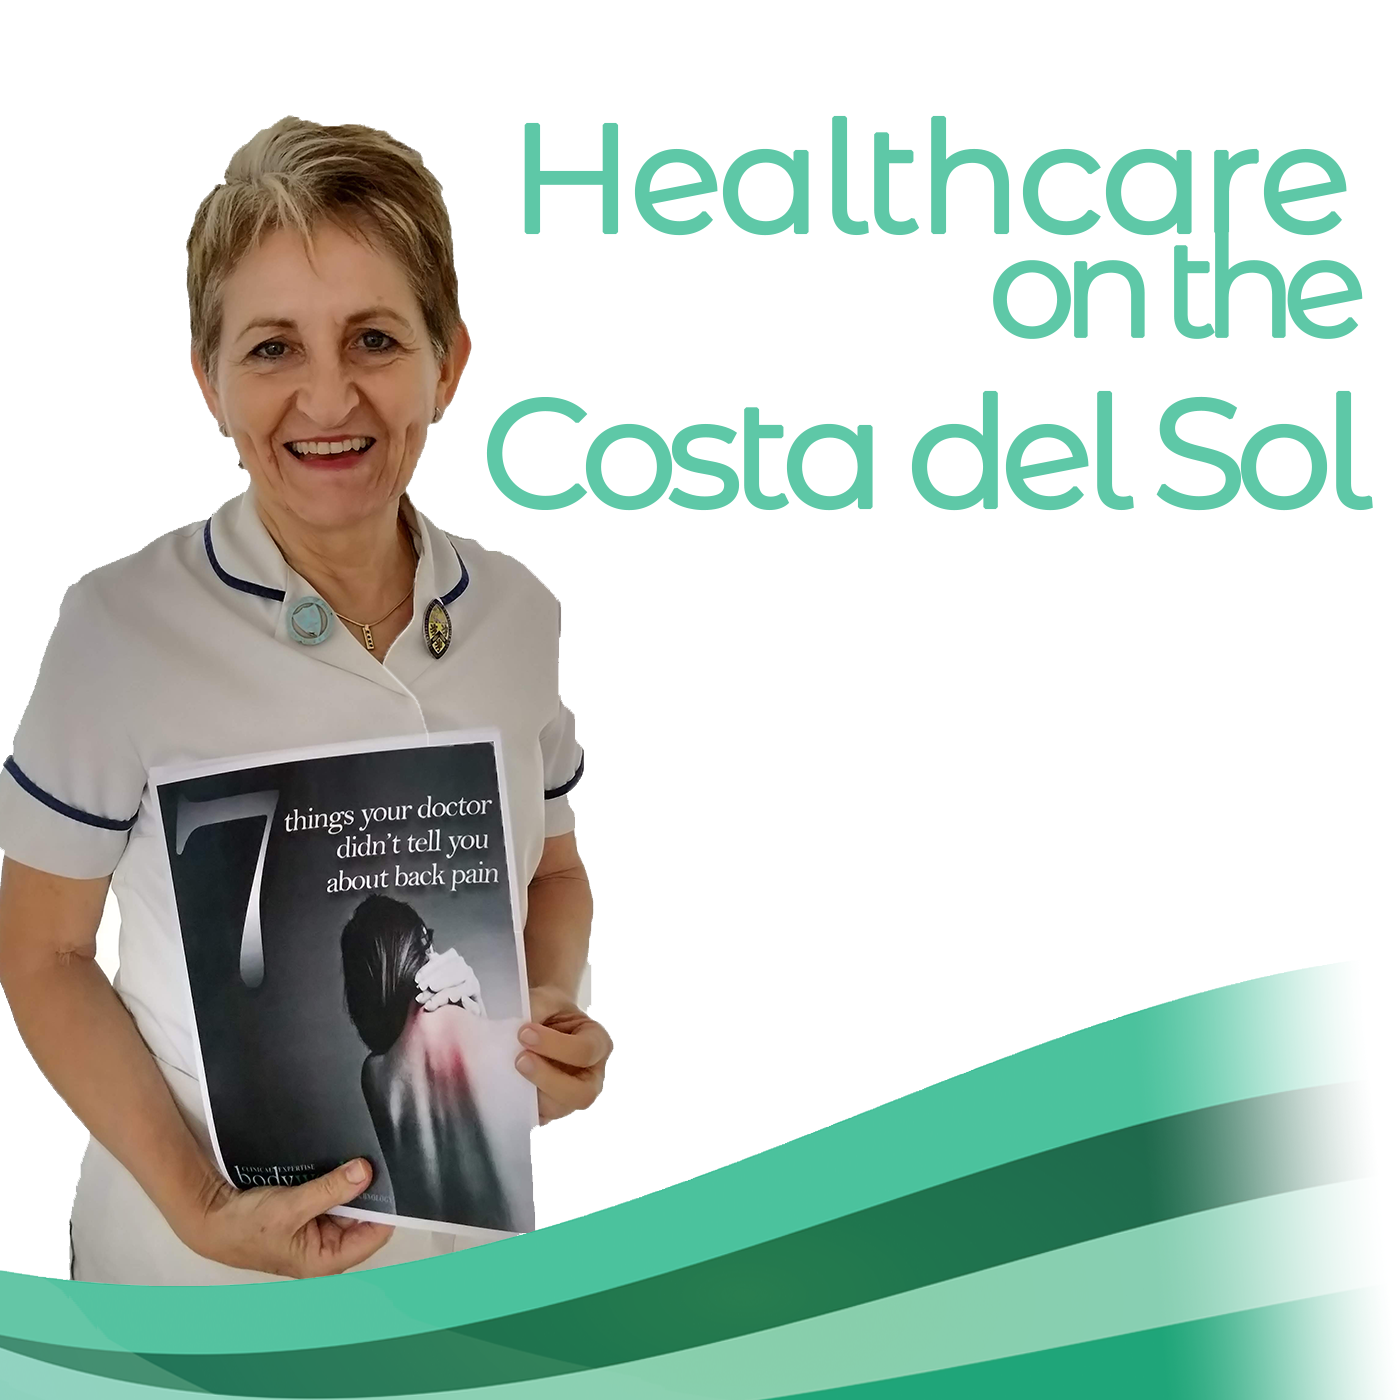 Podcast Episode 5 - 7 myths about back pain. Healthcare on the Costa del Sol with Estelle Mitchell